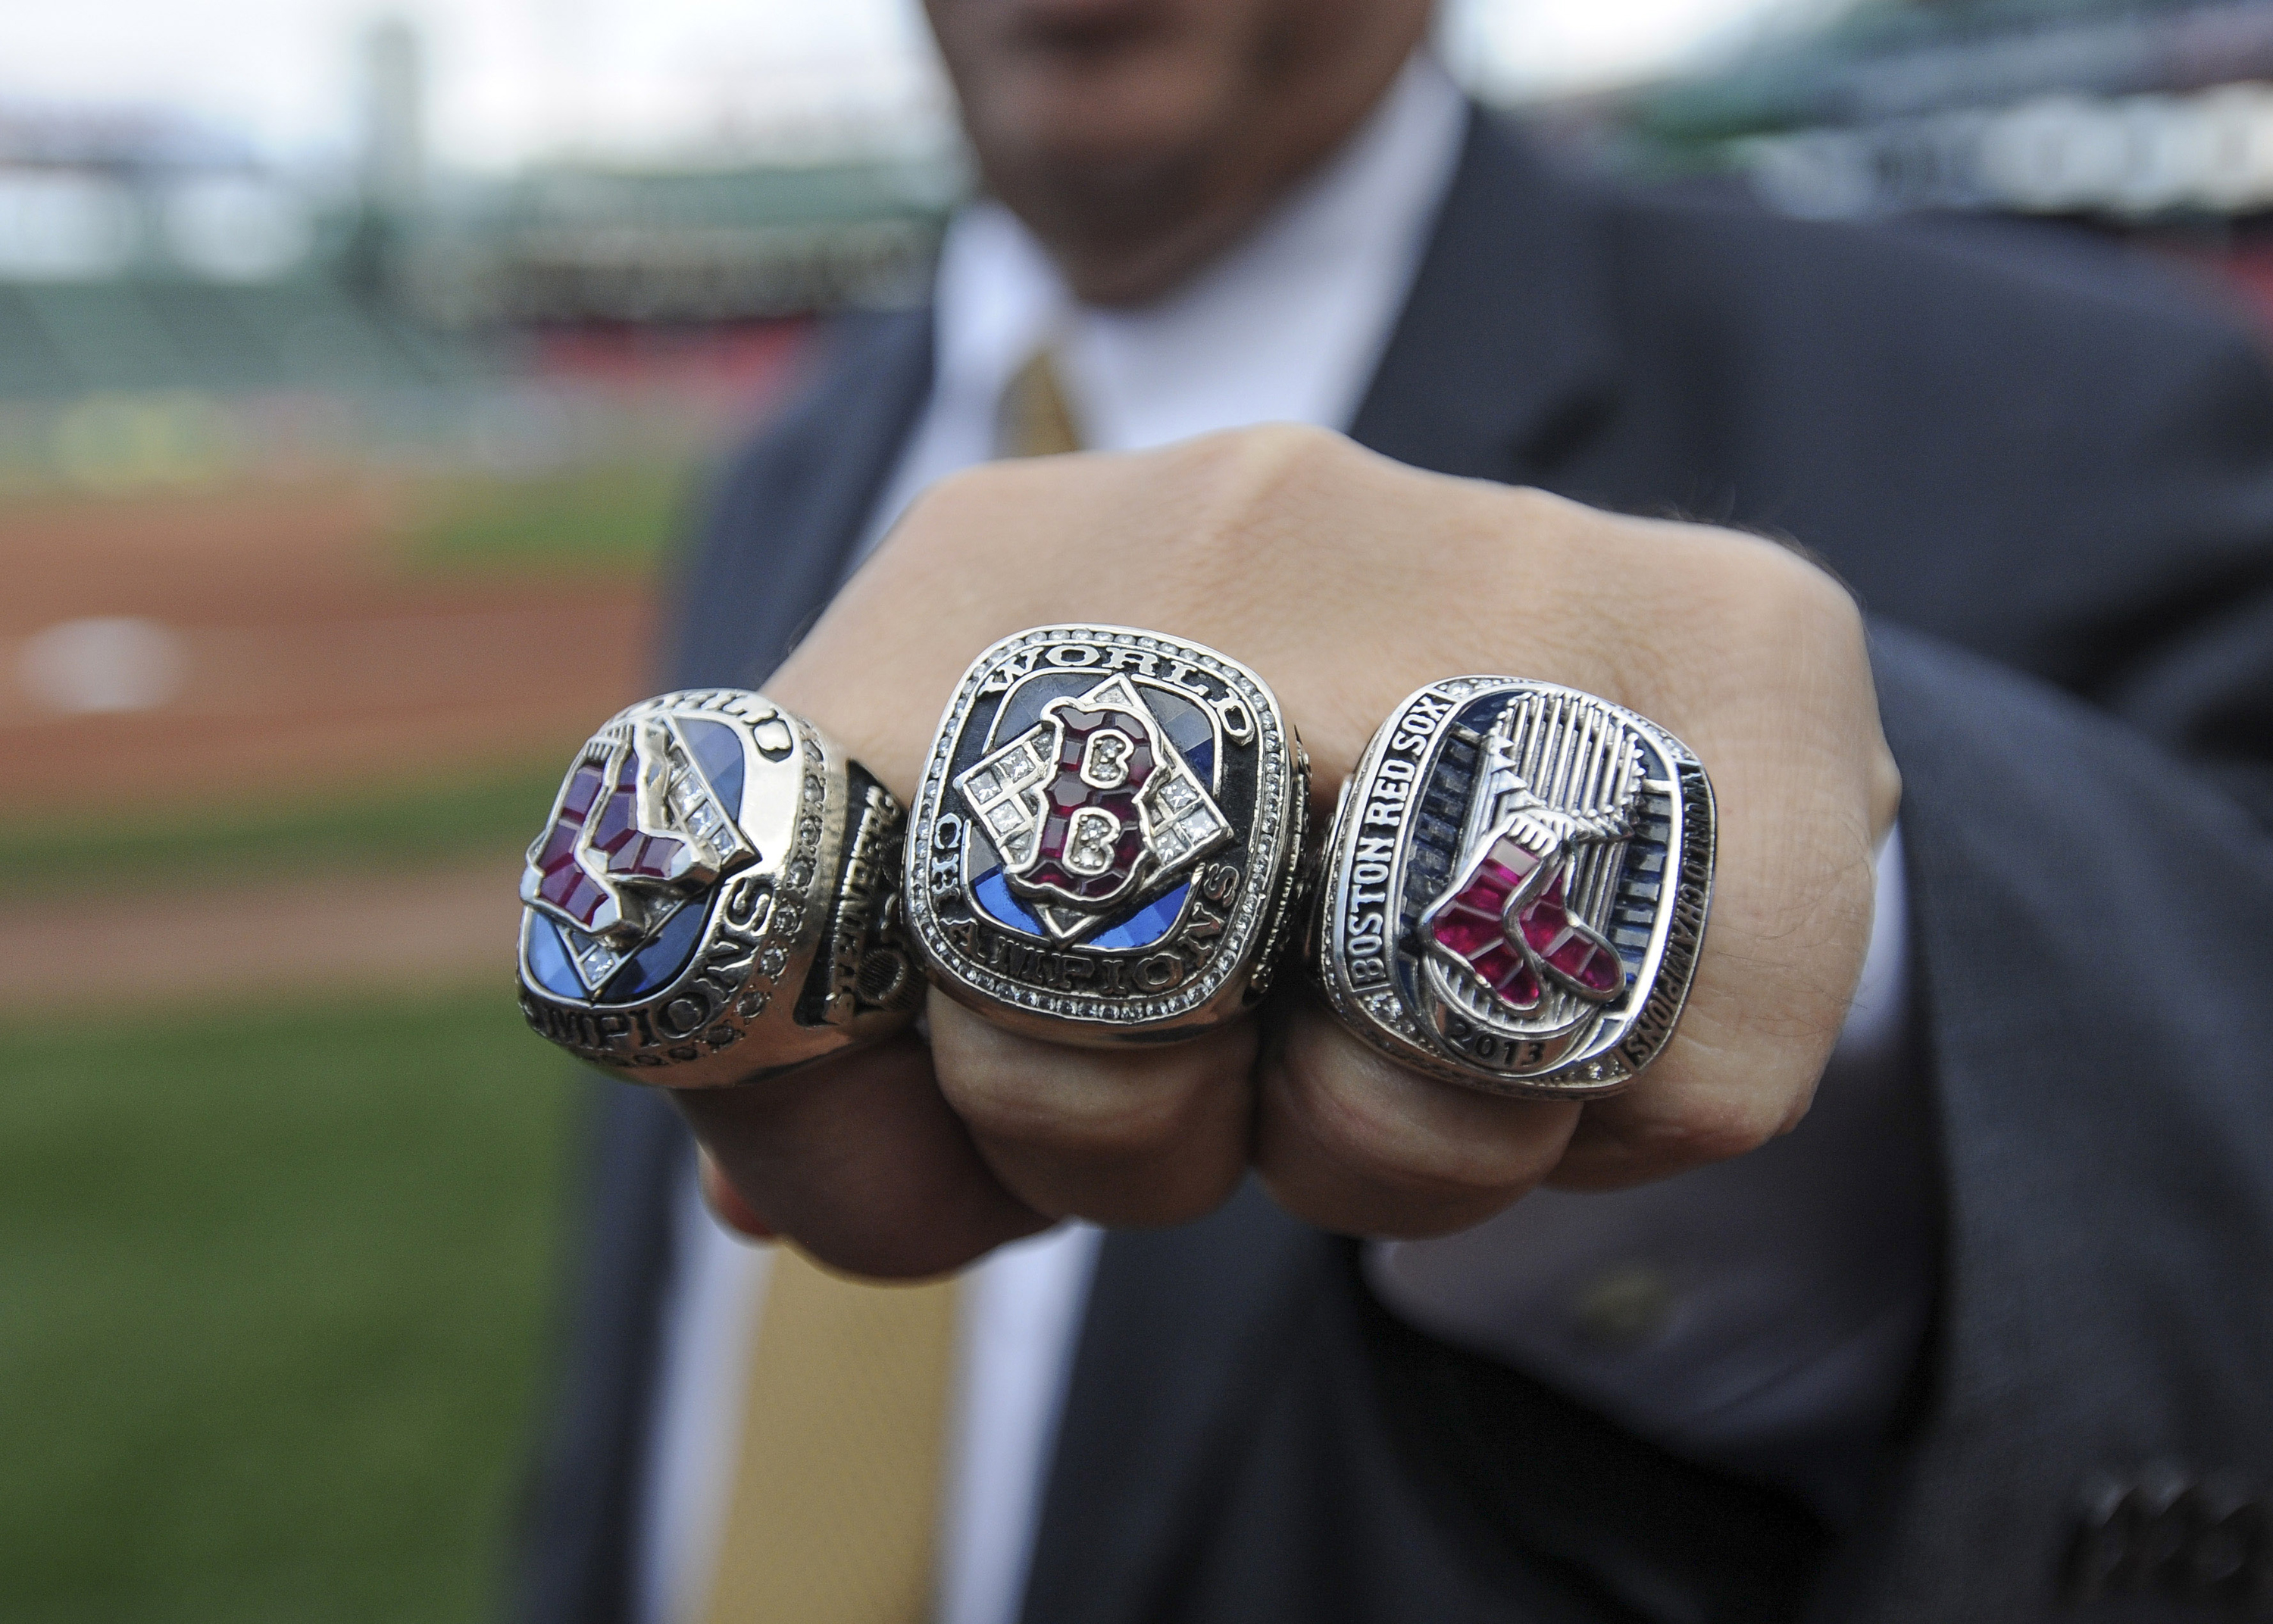 Baby Shark on Nationals ring and 9 other ring details in sports